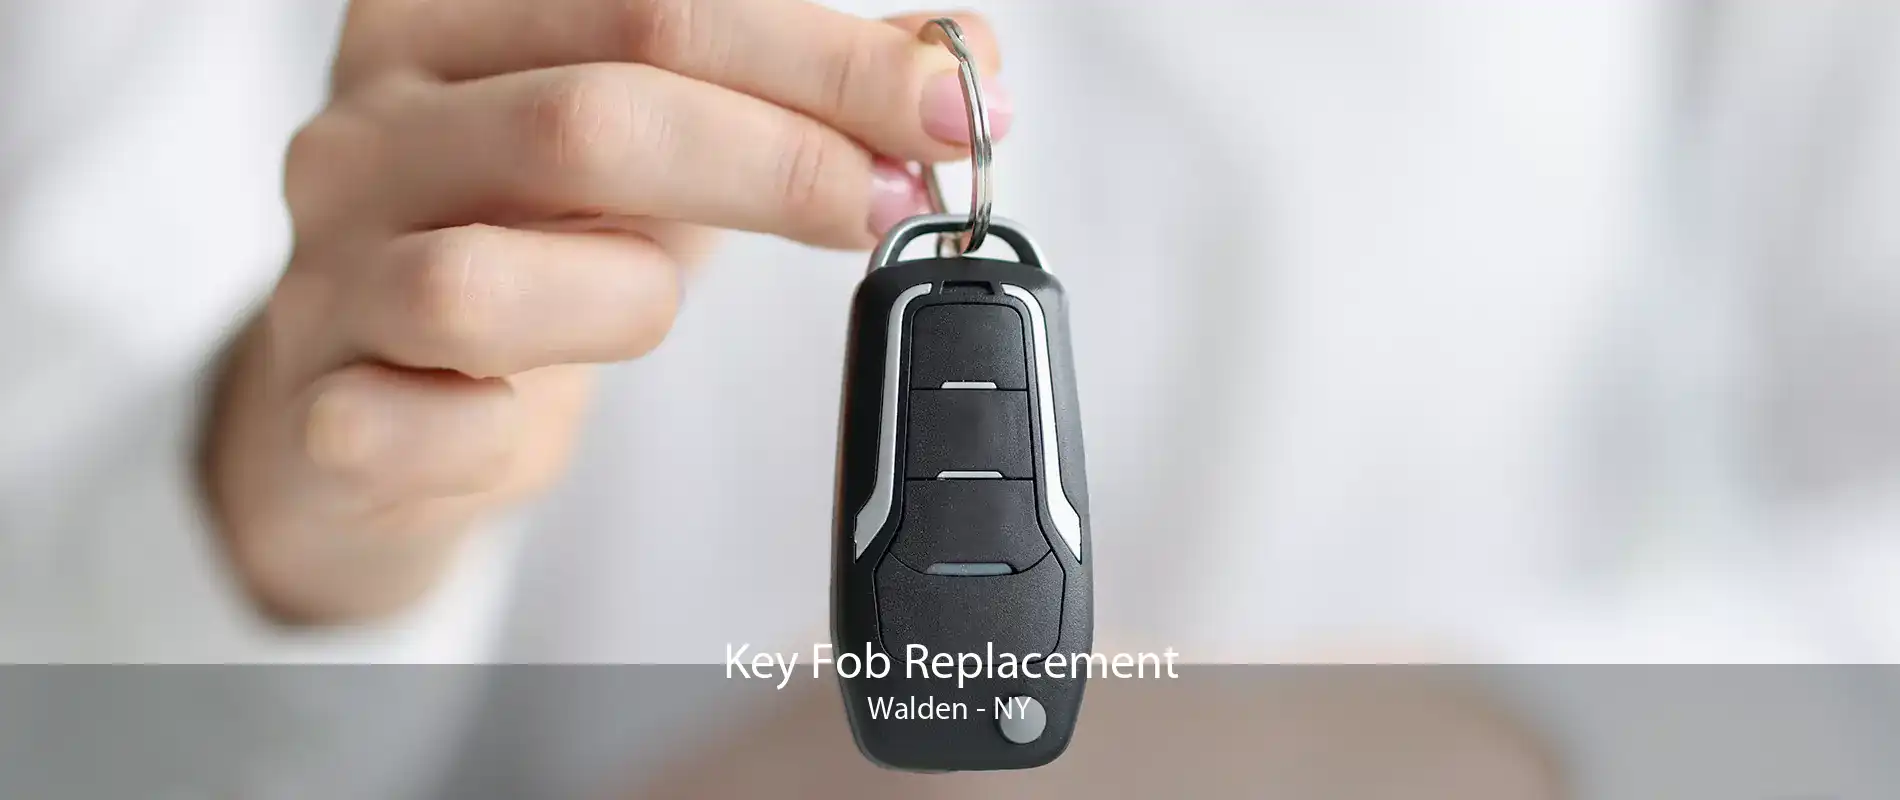 Key Fob Replacement Walden - NY